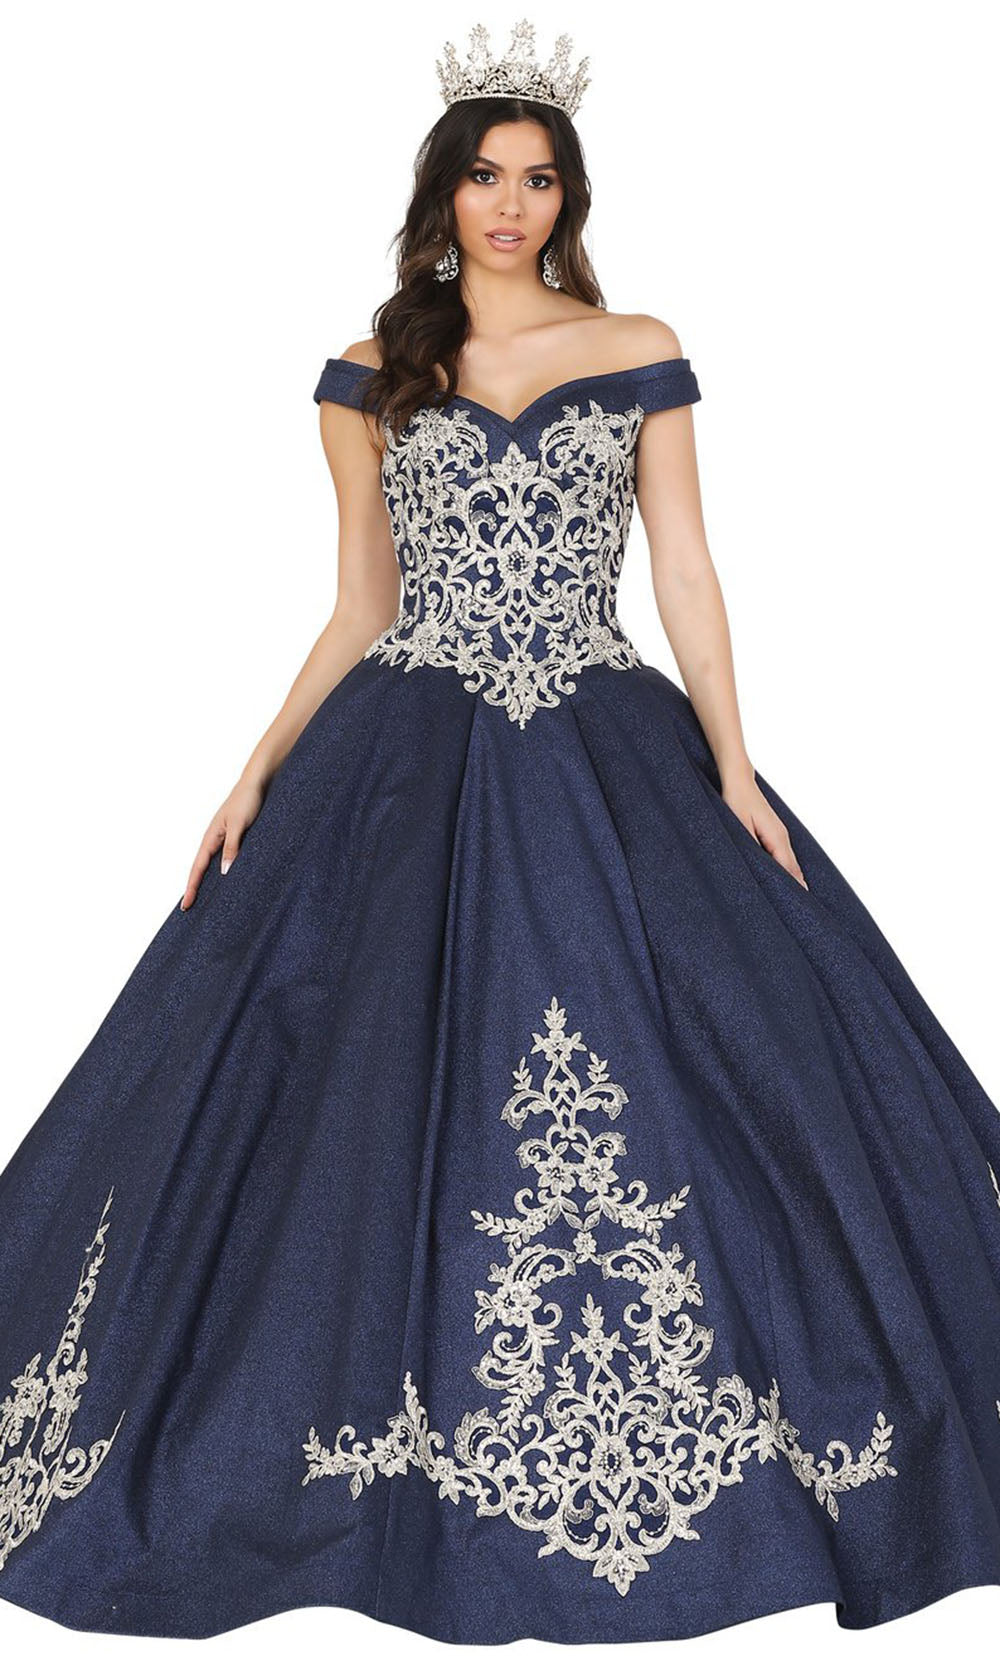 Dancing Queen - 1507 Embroidered Glittery Ballgown In Blue and Silver